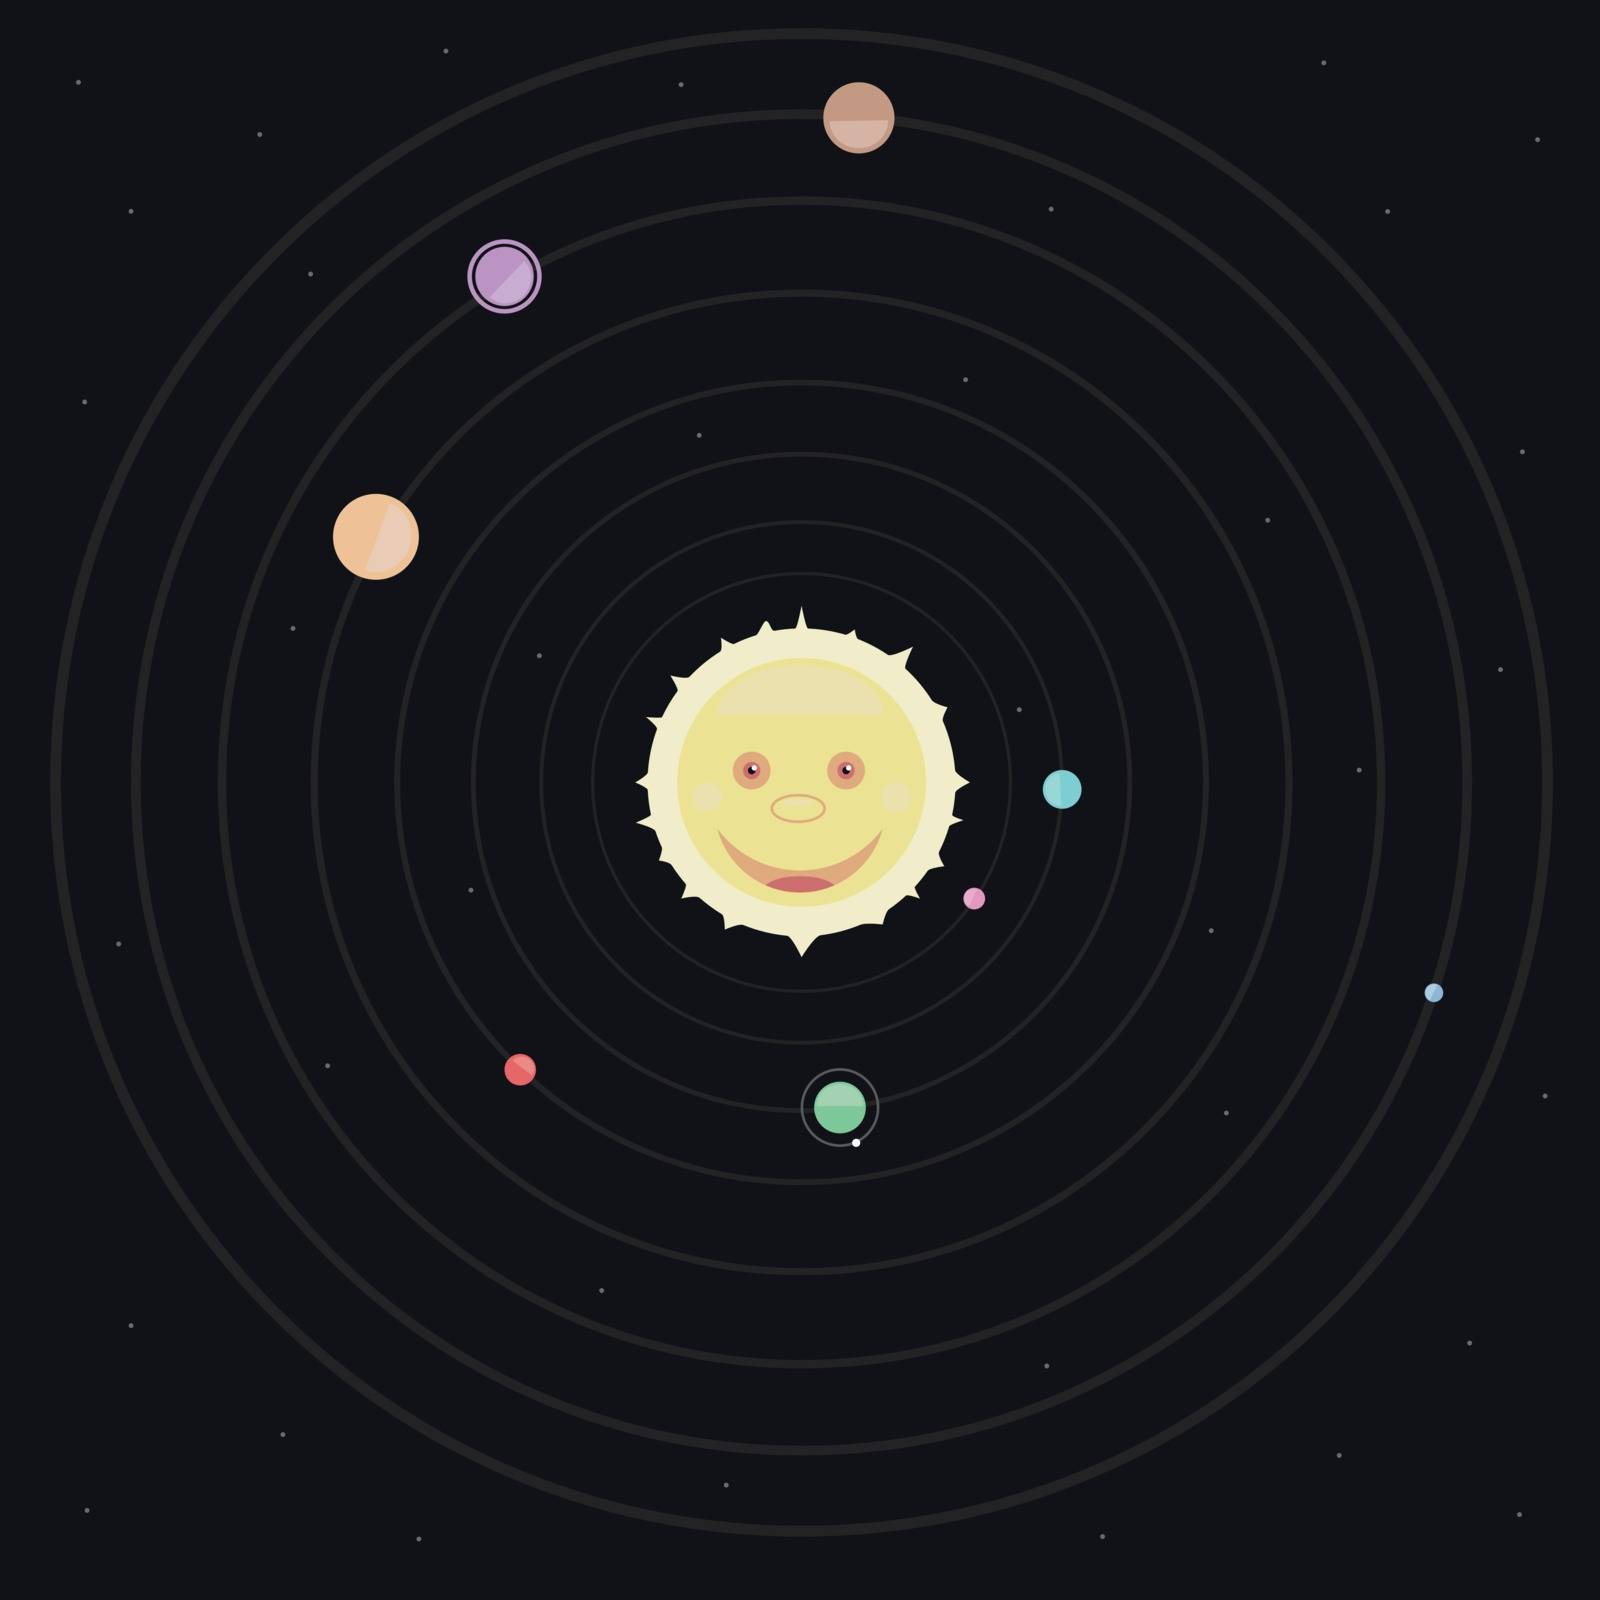 The planets of the solar system revolve around a smiling sun in the open space